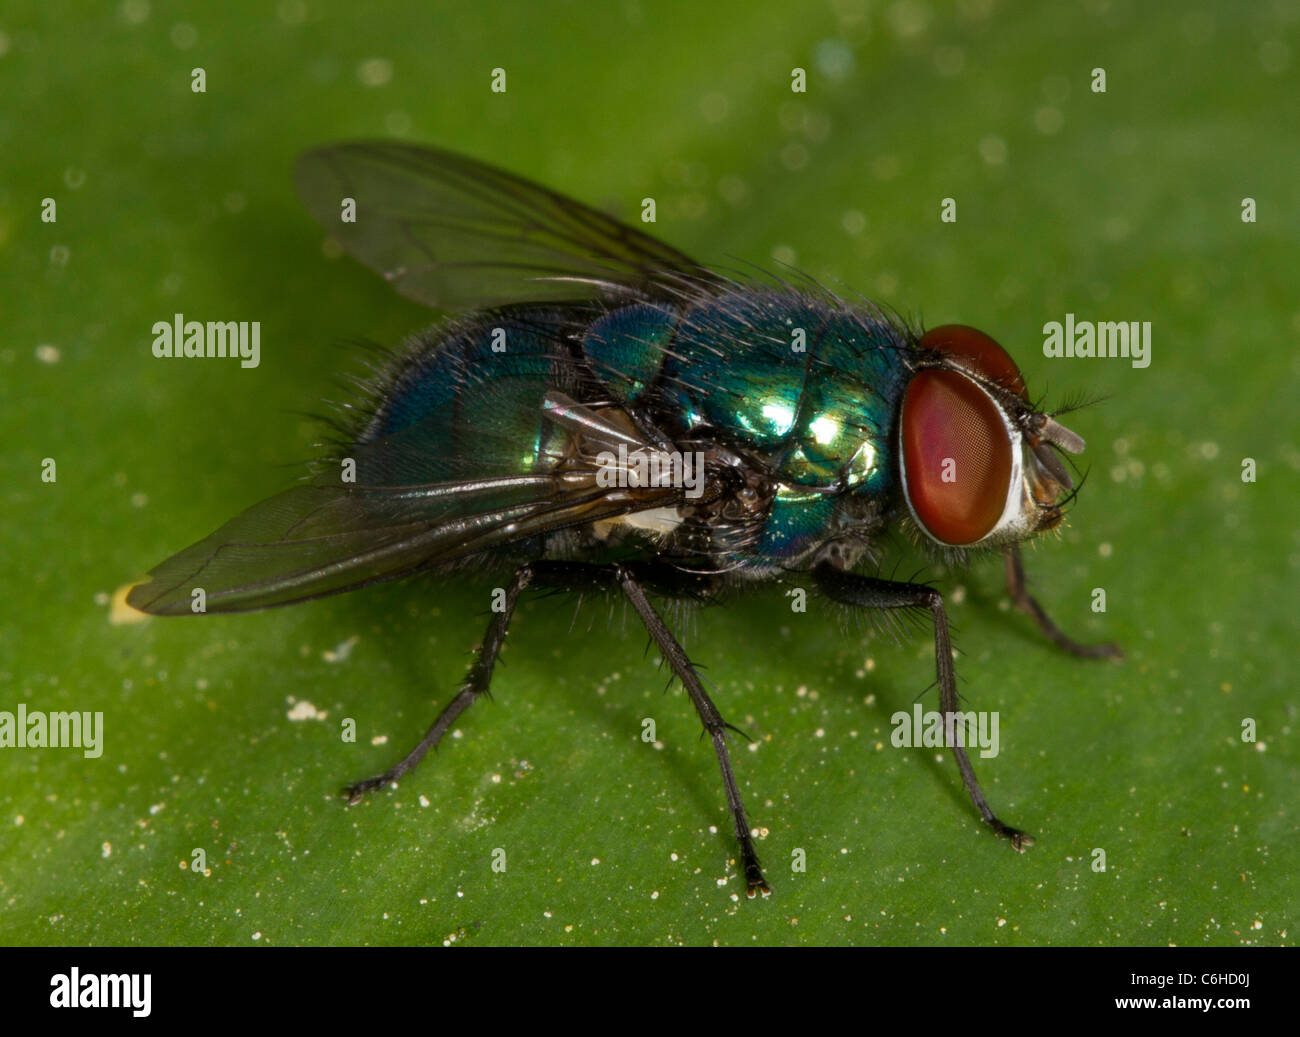 Greenbottle fly (Lucilia or Paenicia sericata), a common blowfly. Used by forensic entomologists to determine age of cadavers. Stock Photo